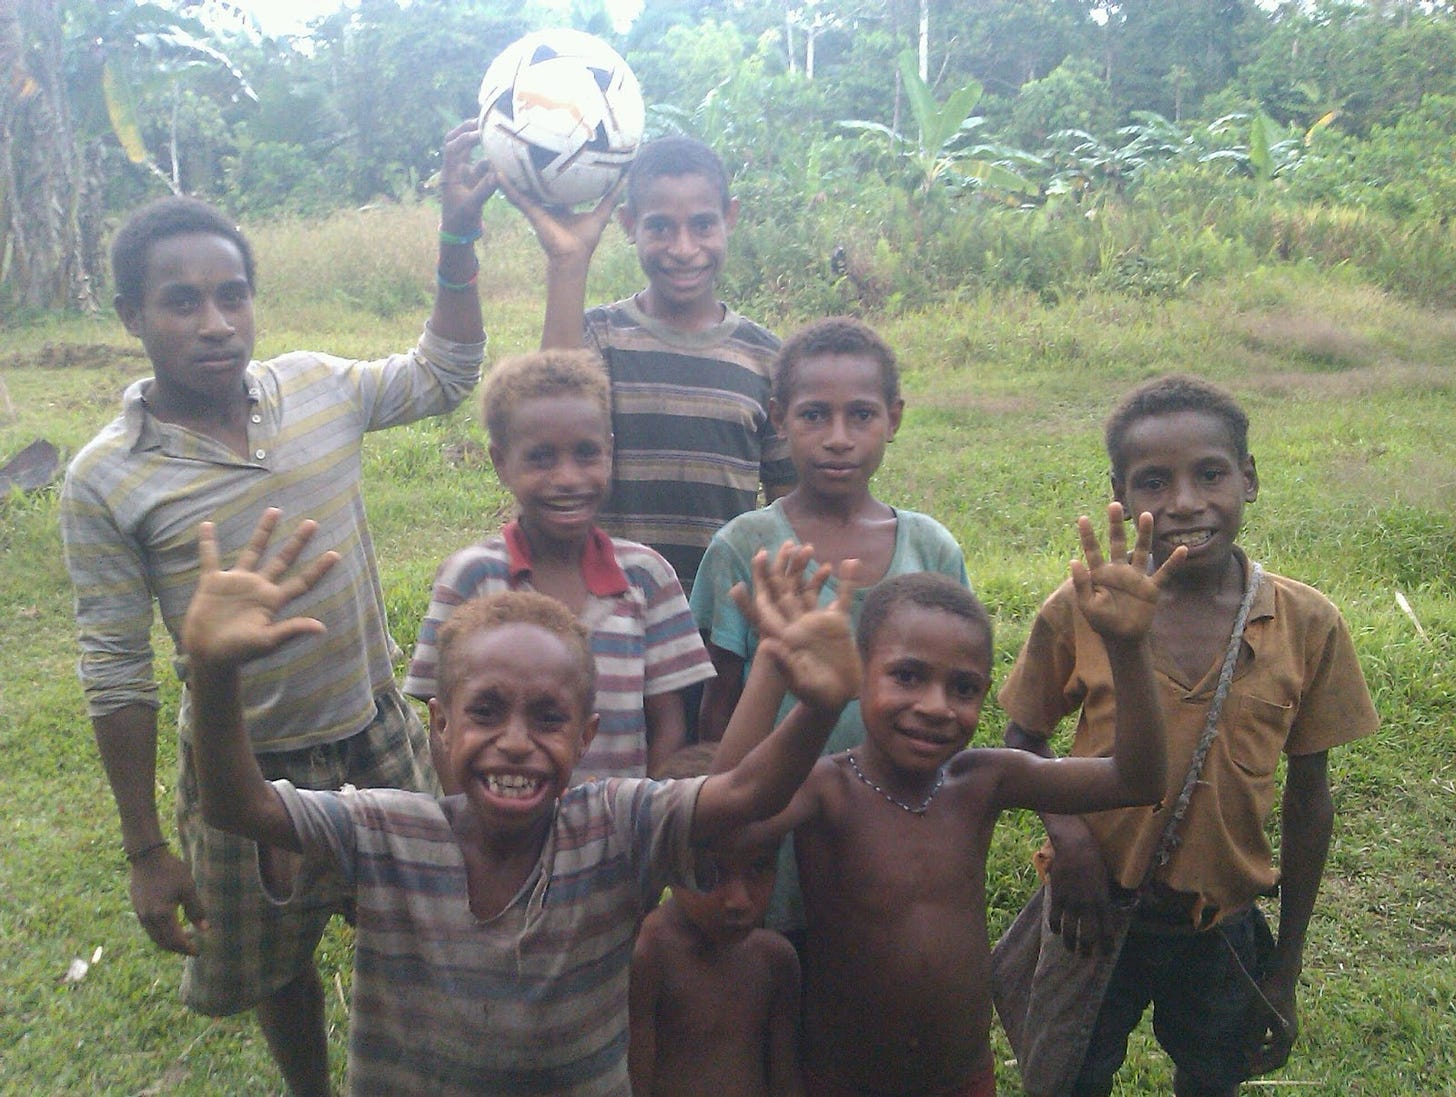 Kids posing happily with a soccer ball